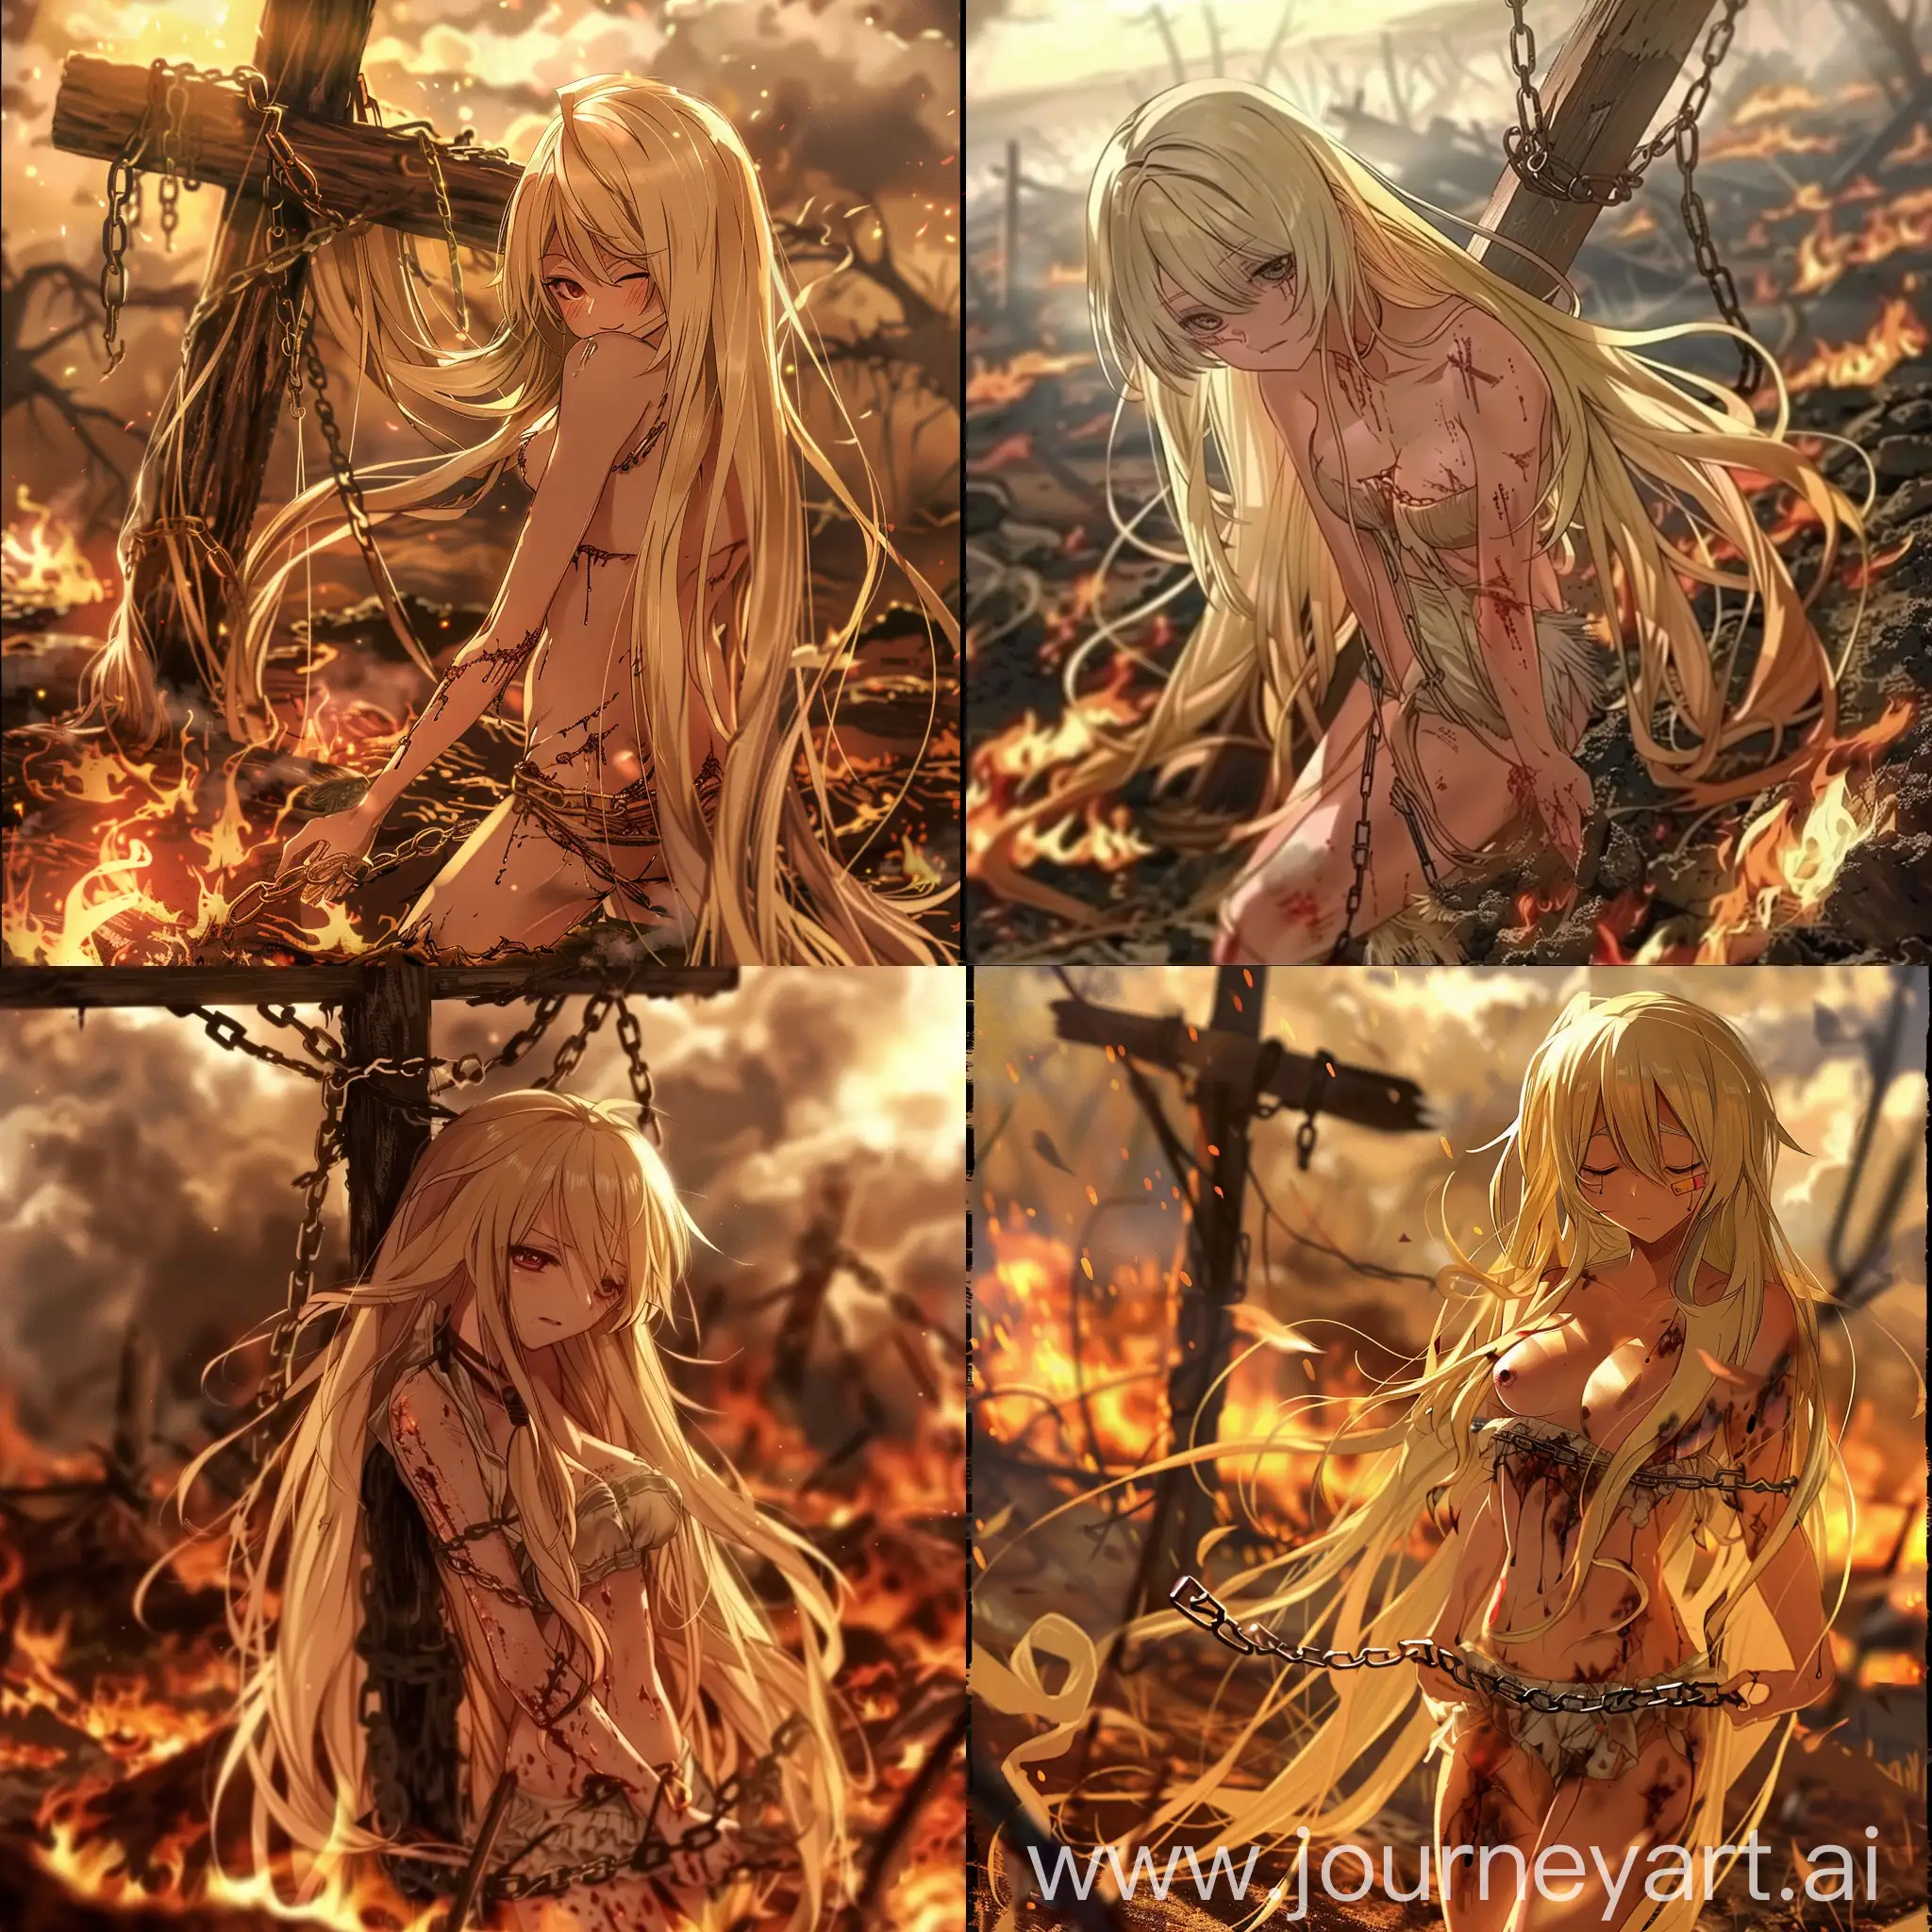 Blonde-Woman-Chained-to-Cross-in-Anime-Style-Amidst-Burning-Landscape